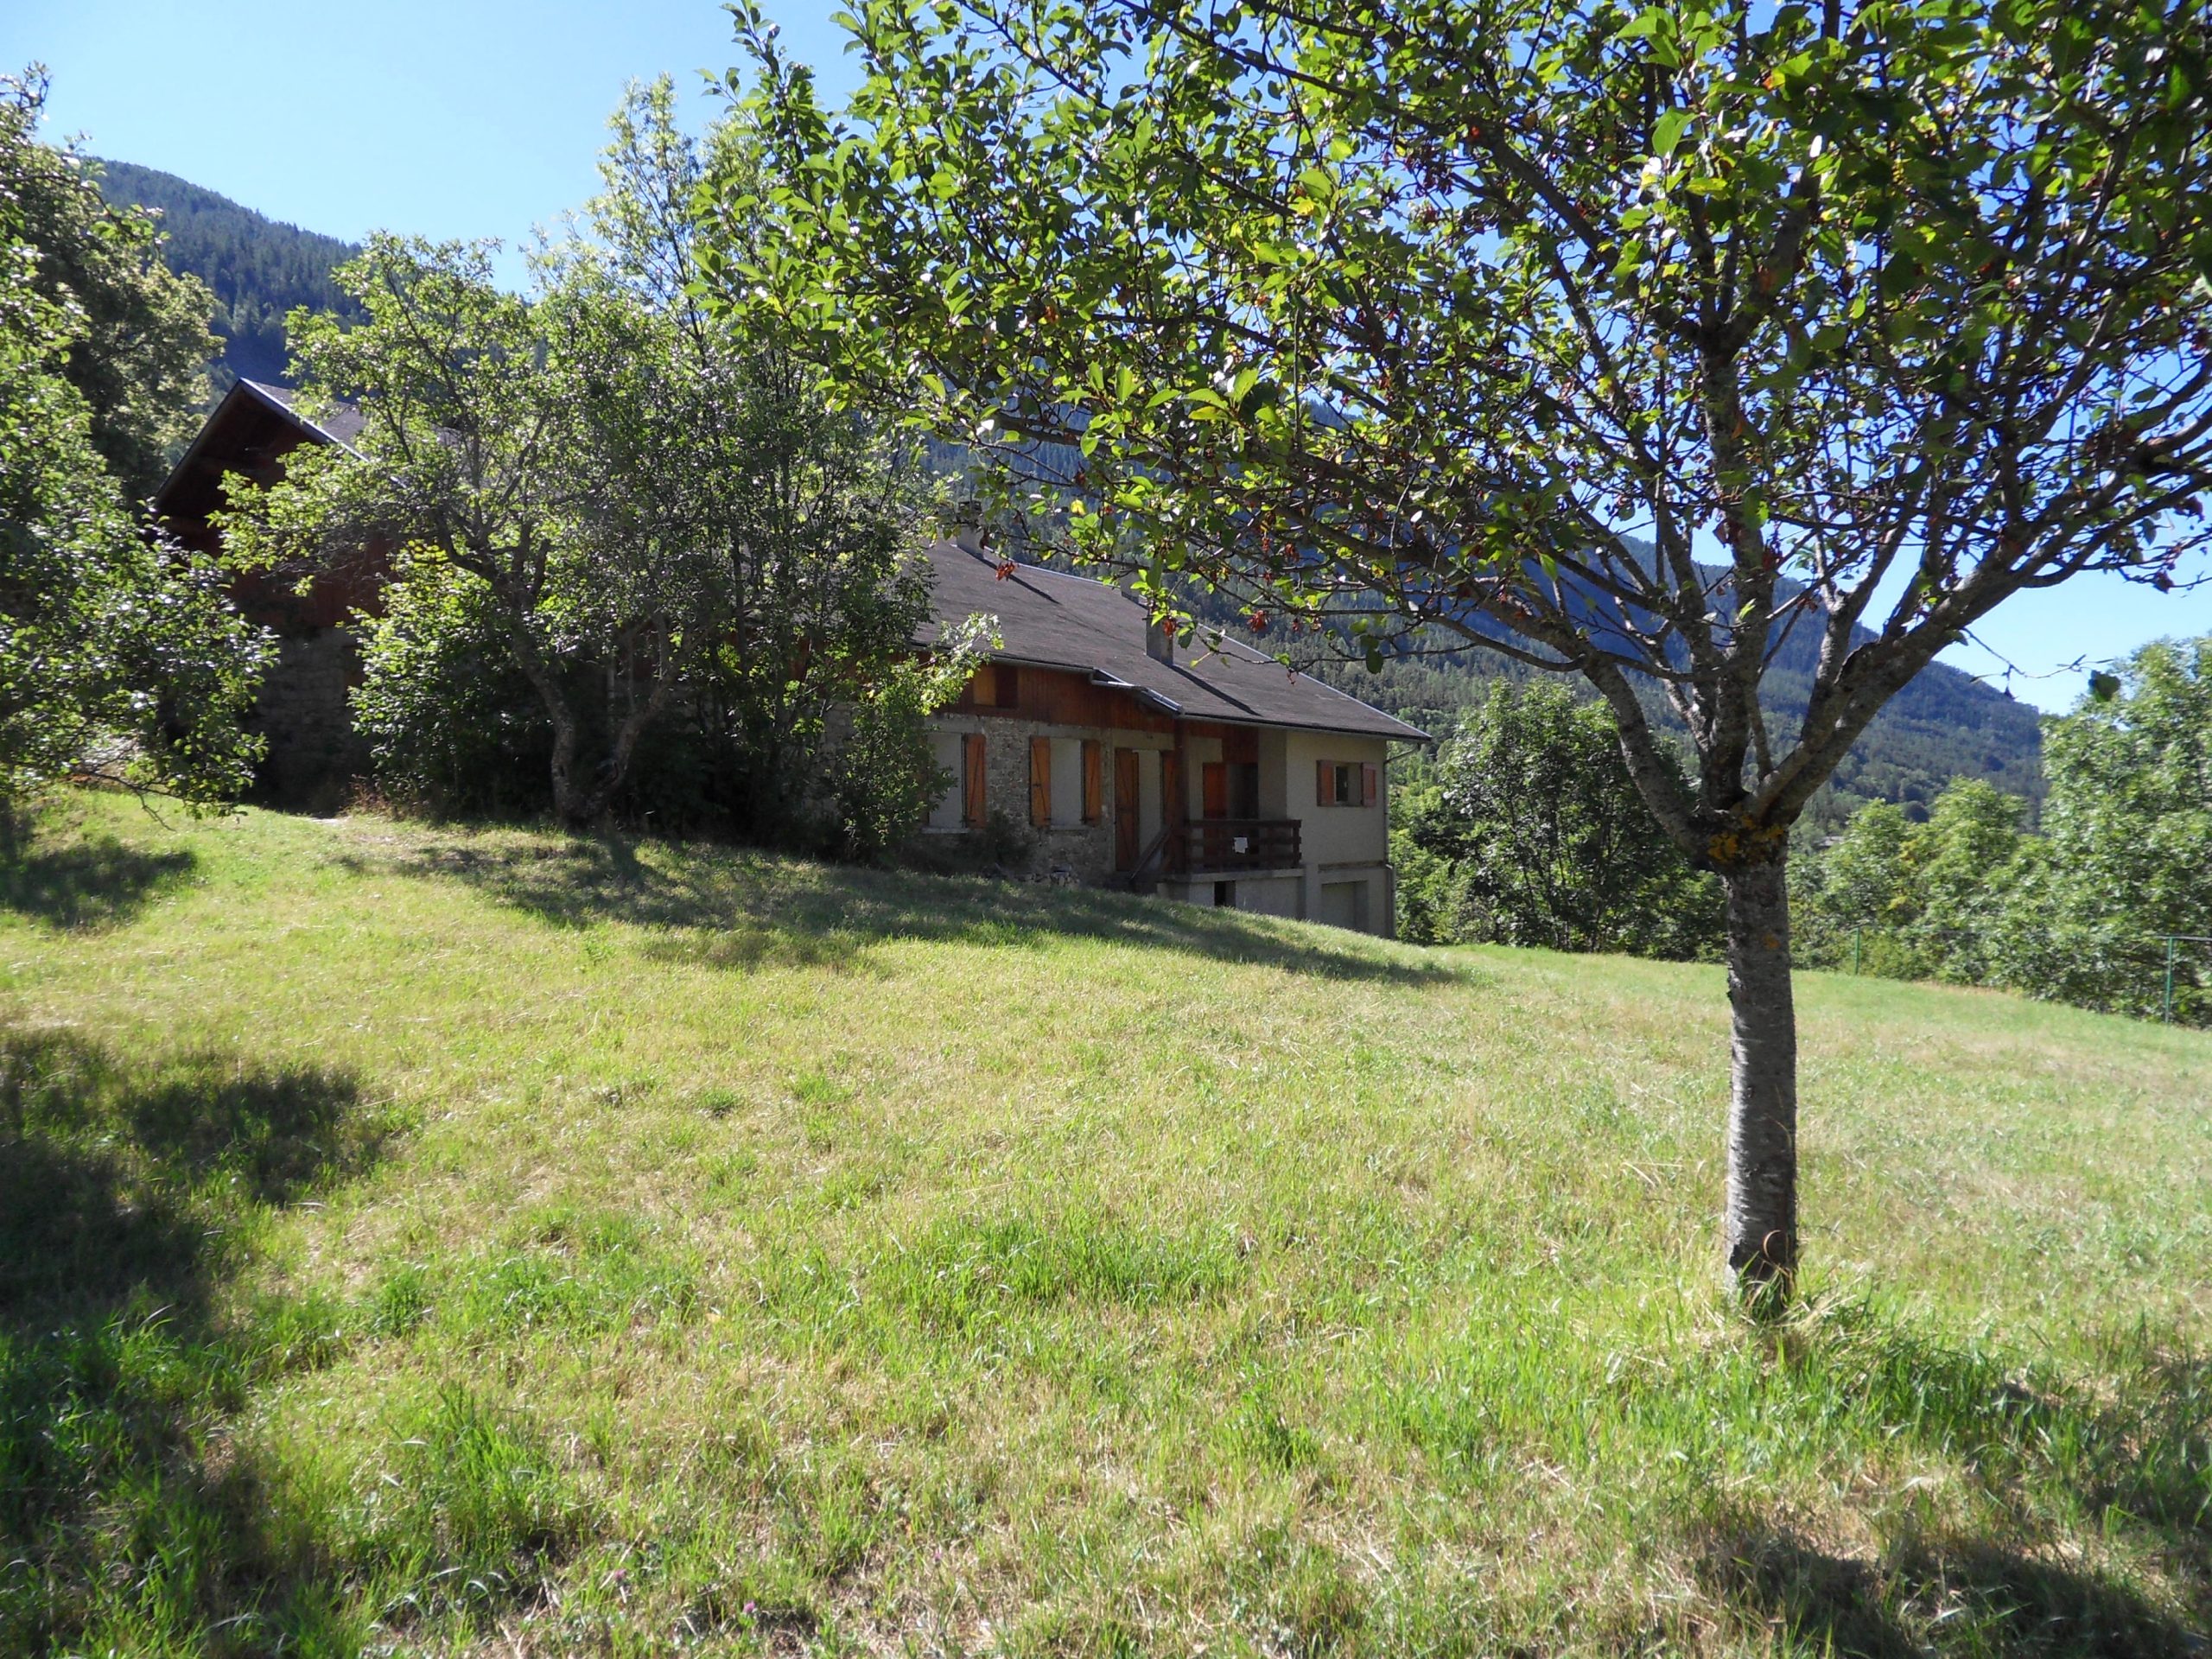 Colmars les Alpes – House 7 Bedrooms 250 sqm with Land 8600 sqm and Outbuildings.